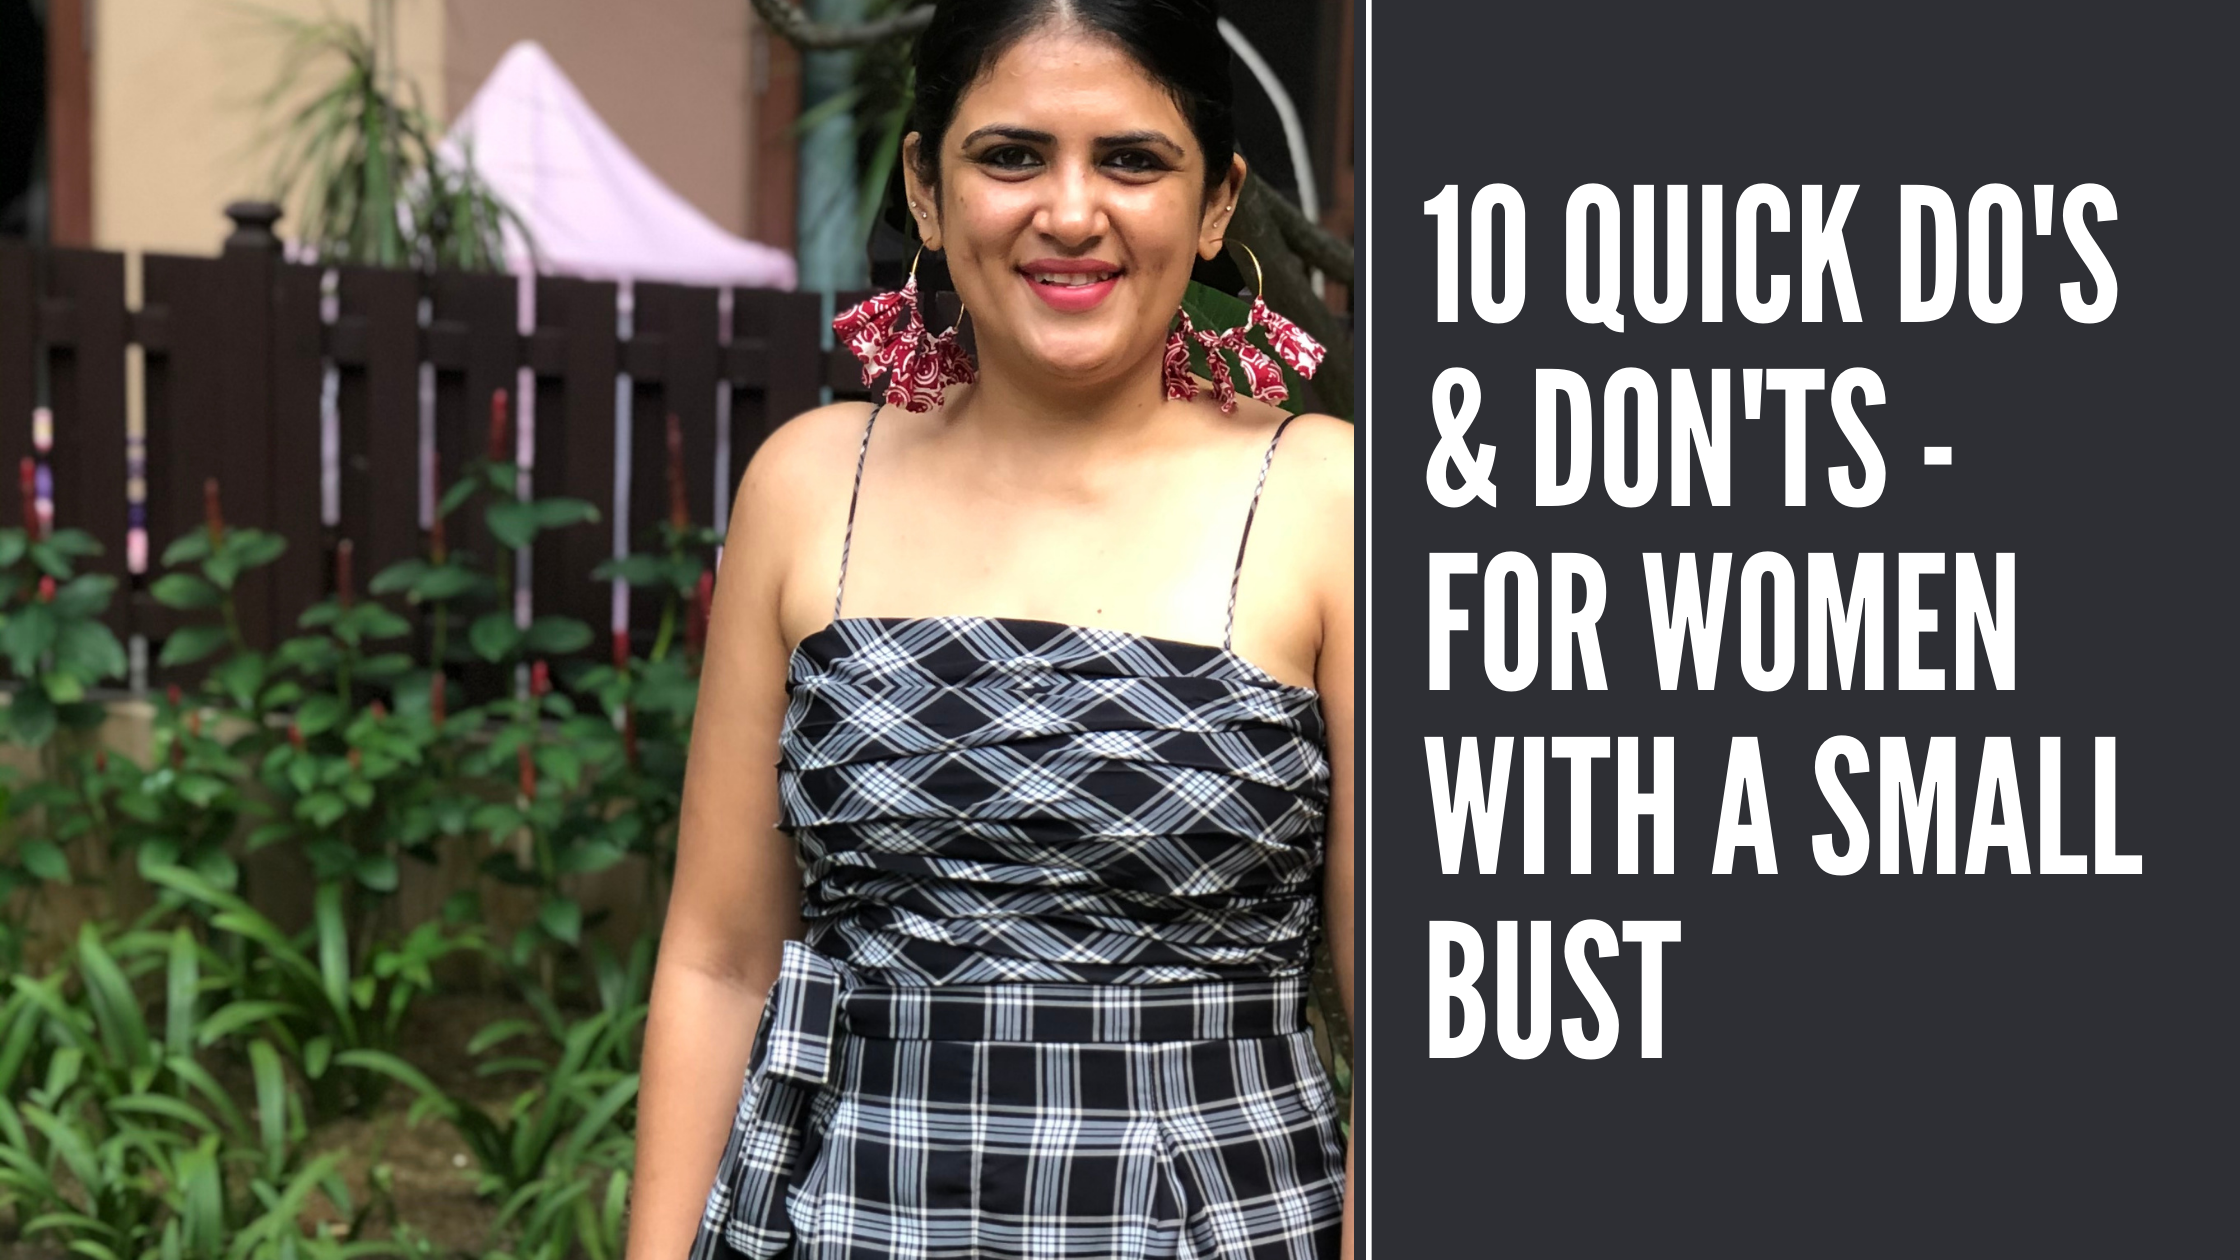 10 quick do's & don'ts - for women with a small bust